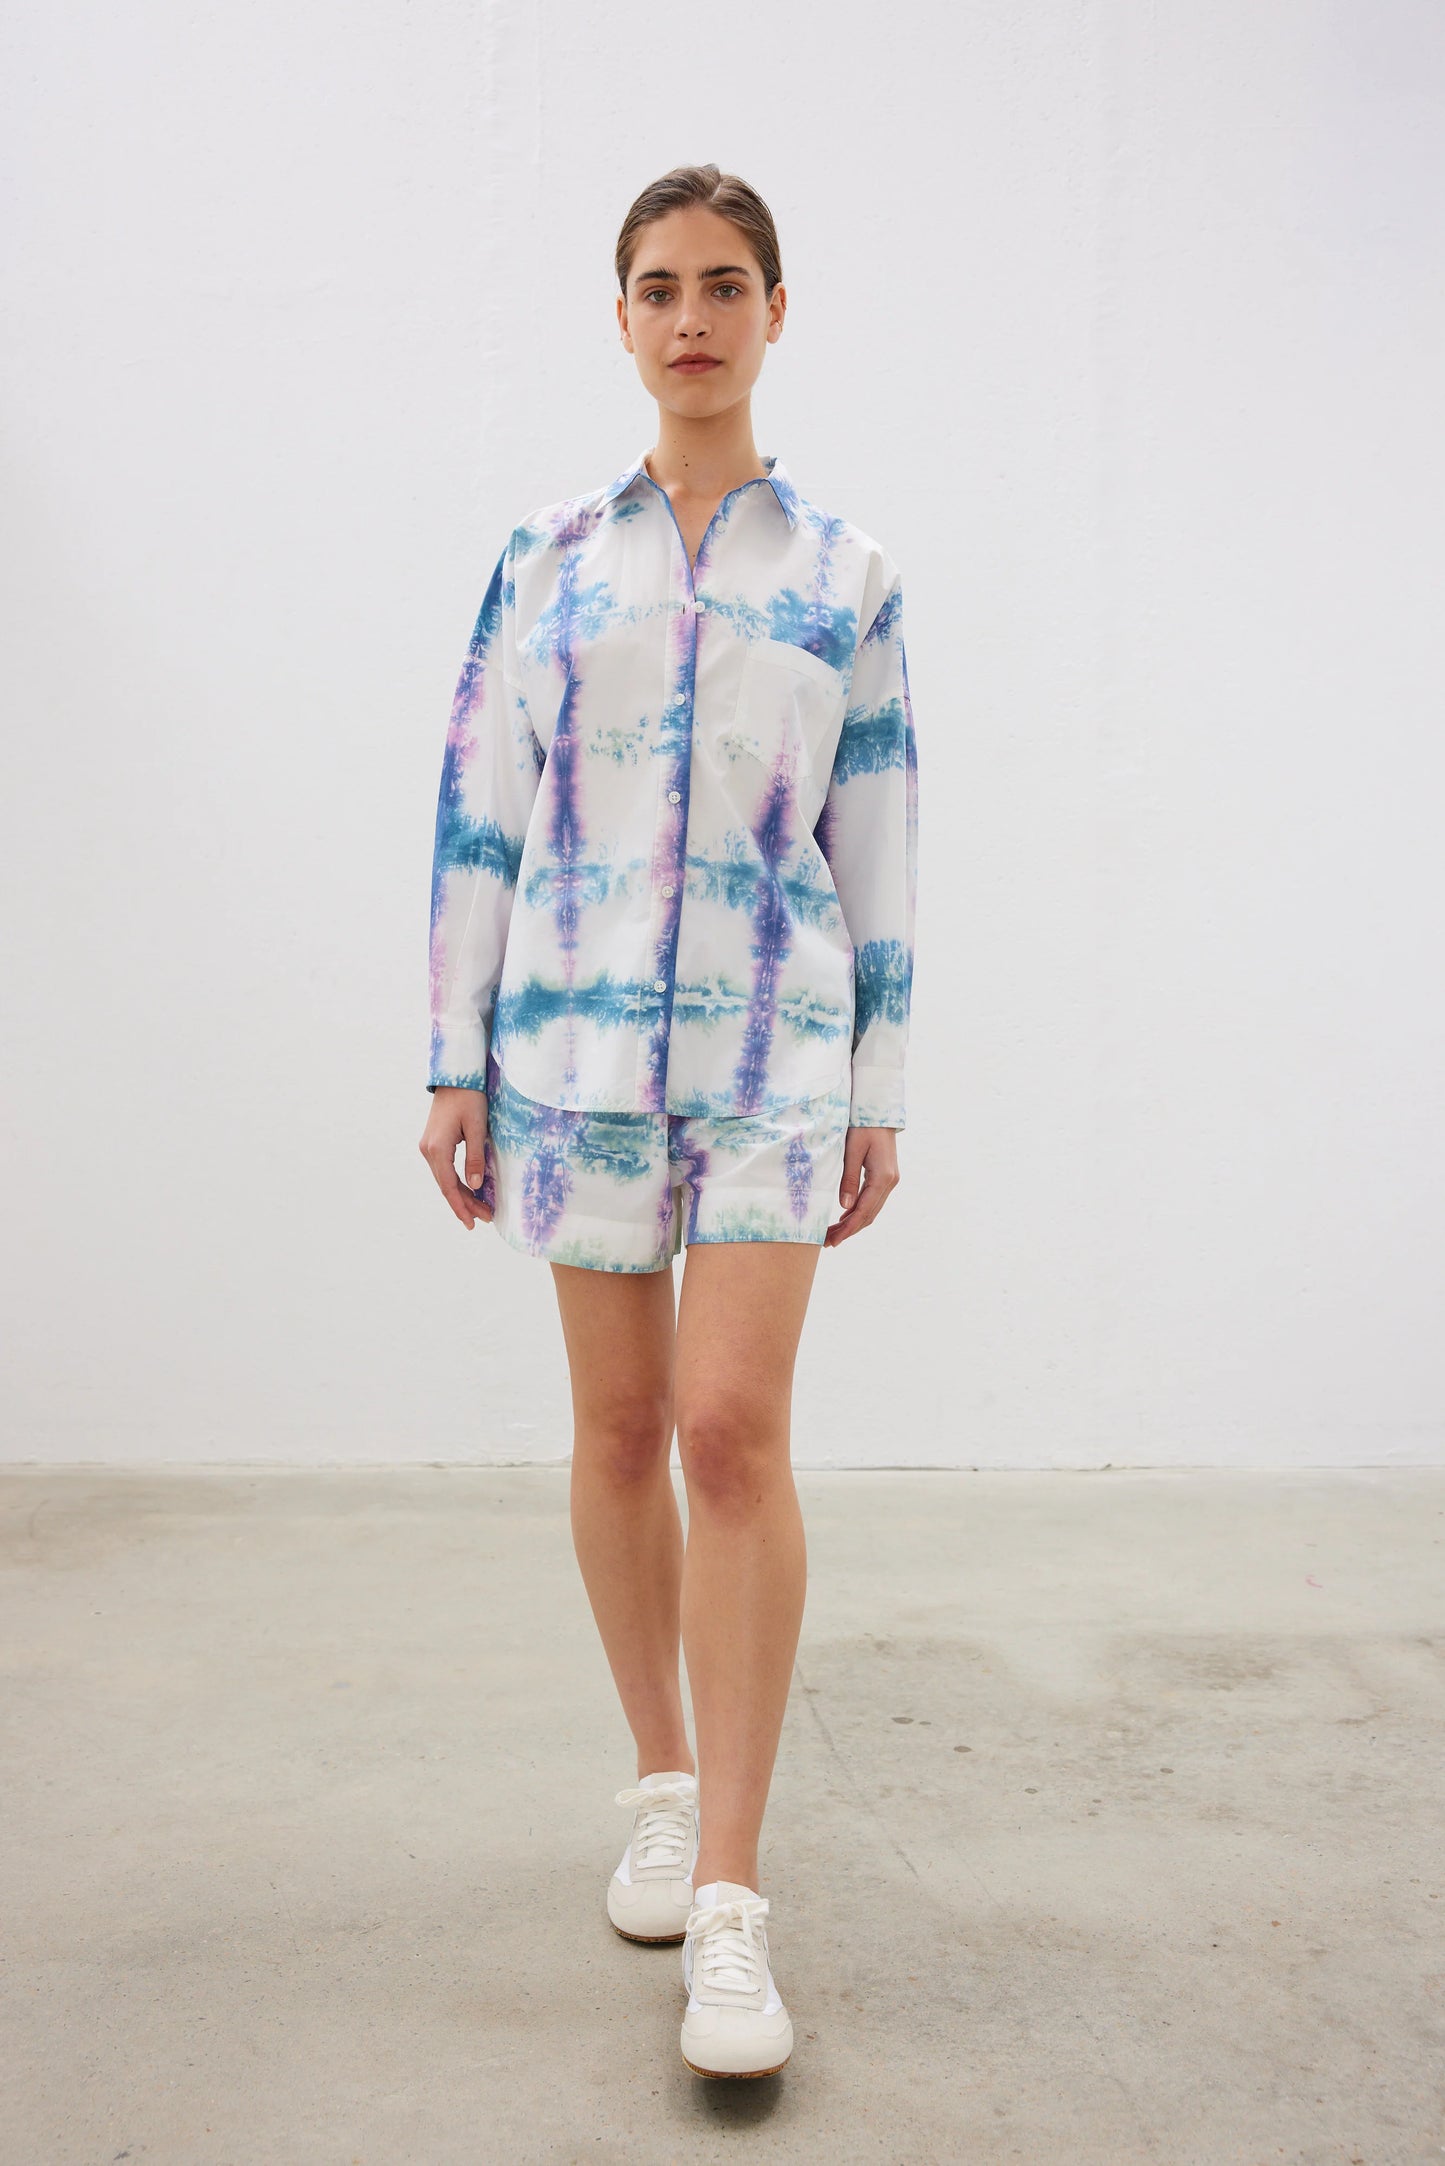 The Chiara Short in Violet Light and Oceanic Tie Dye